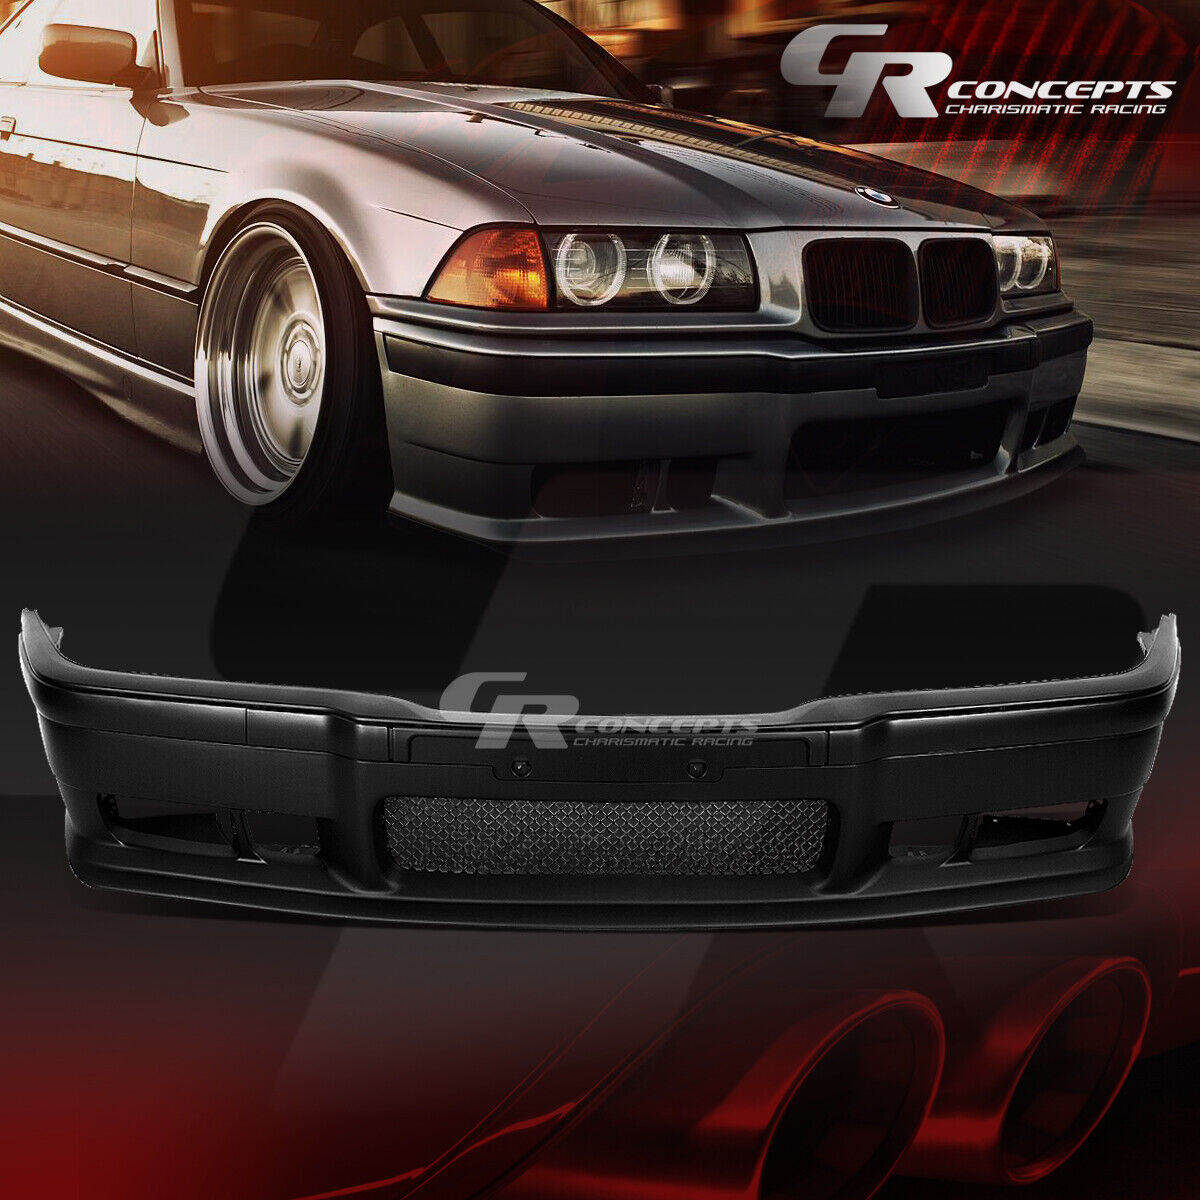 1PC ABS M3 STYLE REPLACEMENT FRONT BUMPER COVER+GRILLE FOR 92-98 BMW E36 3SERIES